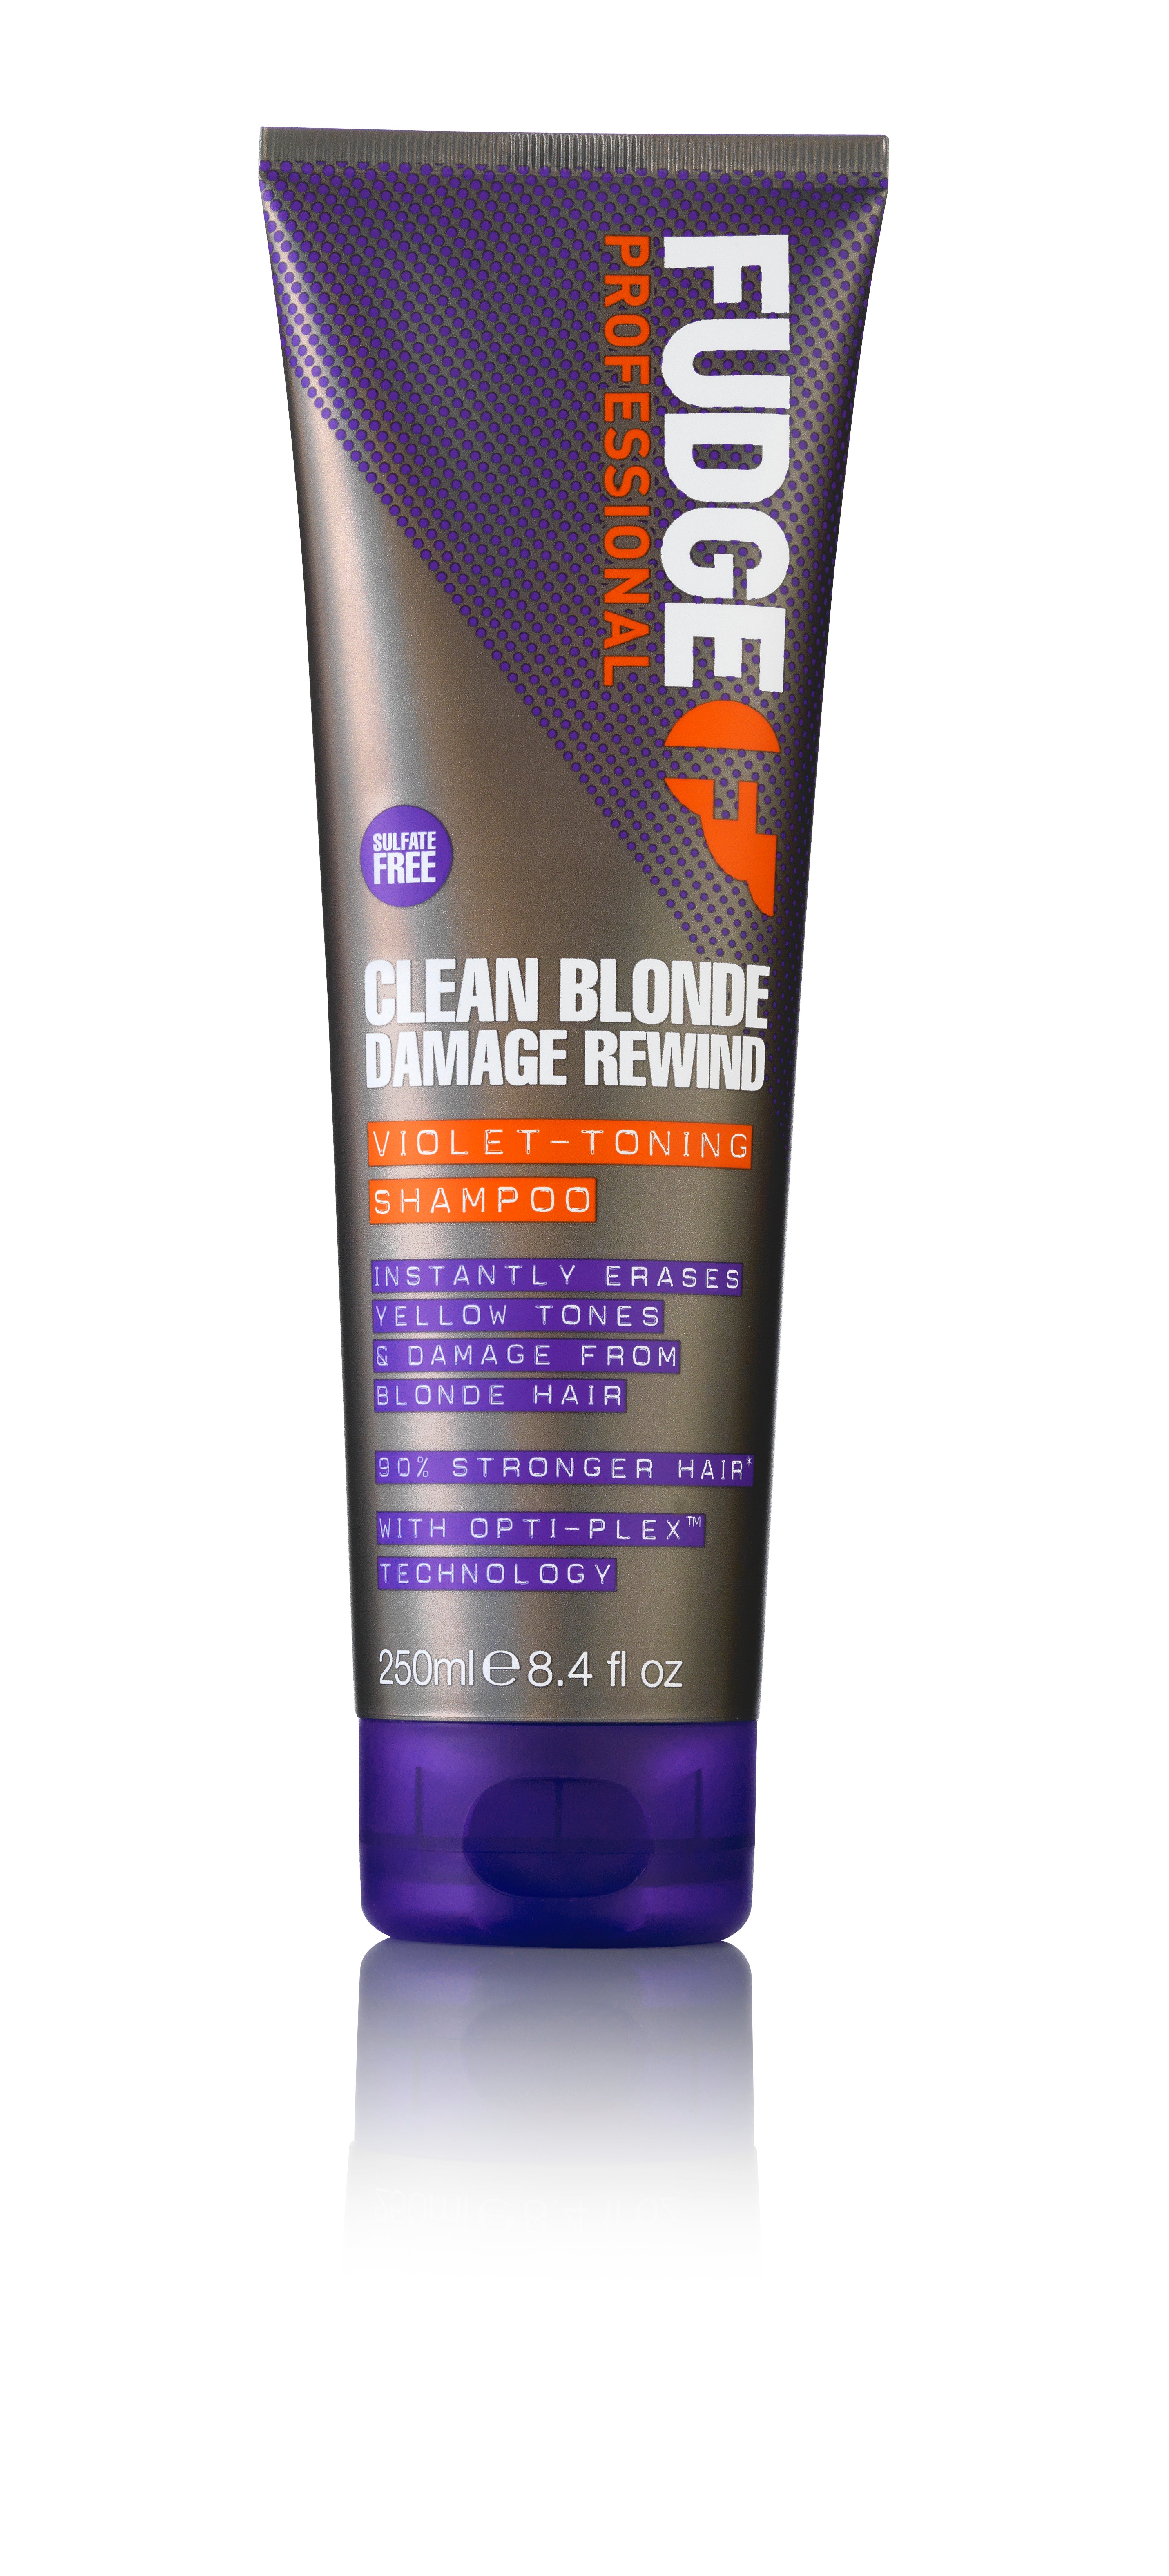 FUDGE CLEAN BLONDE DAMAGE REWIND VIOLET-TONING SHAMPOO - Ultimate Hair and Beauty